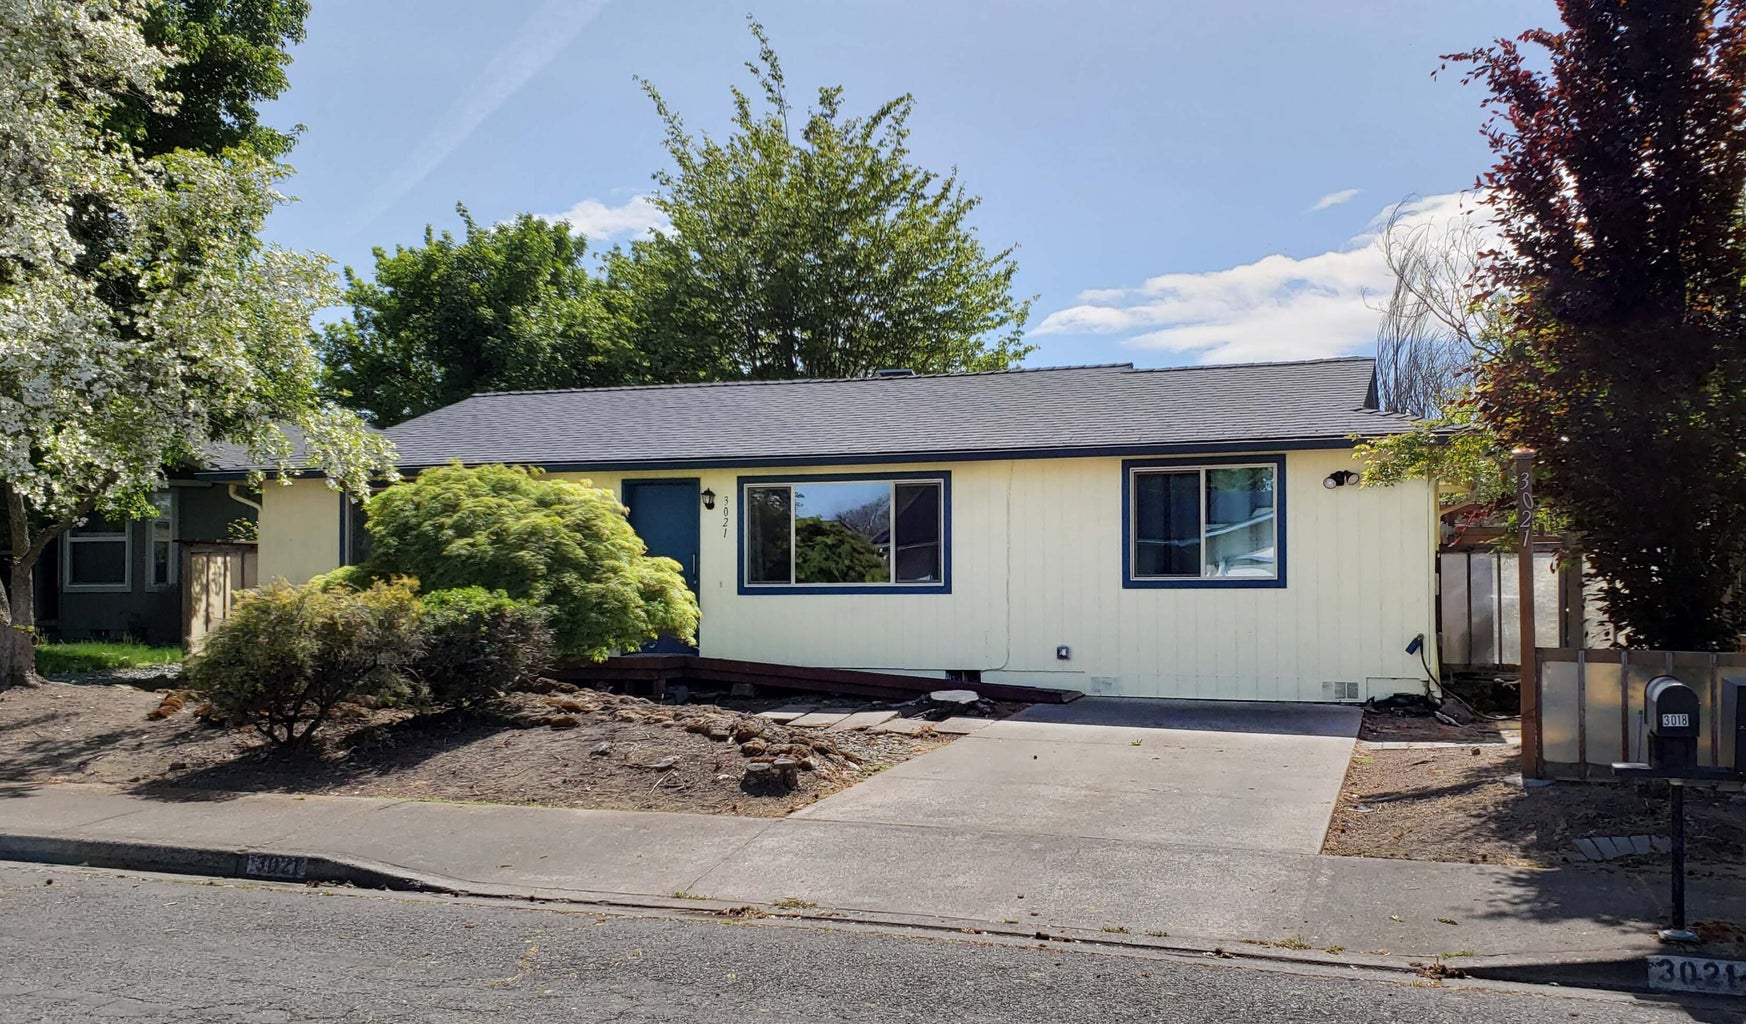 220181192, 3021 Clearview Ave, Medford, OR 97501